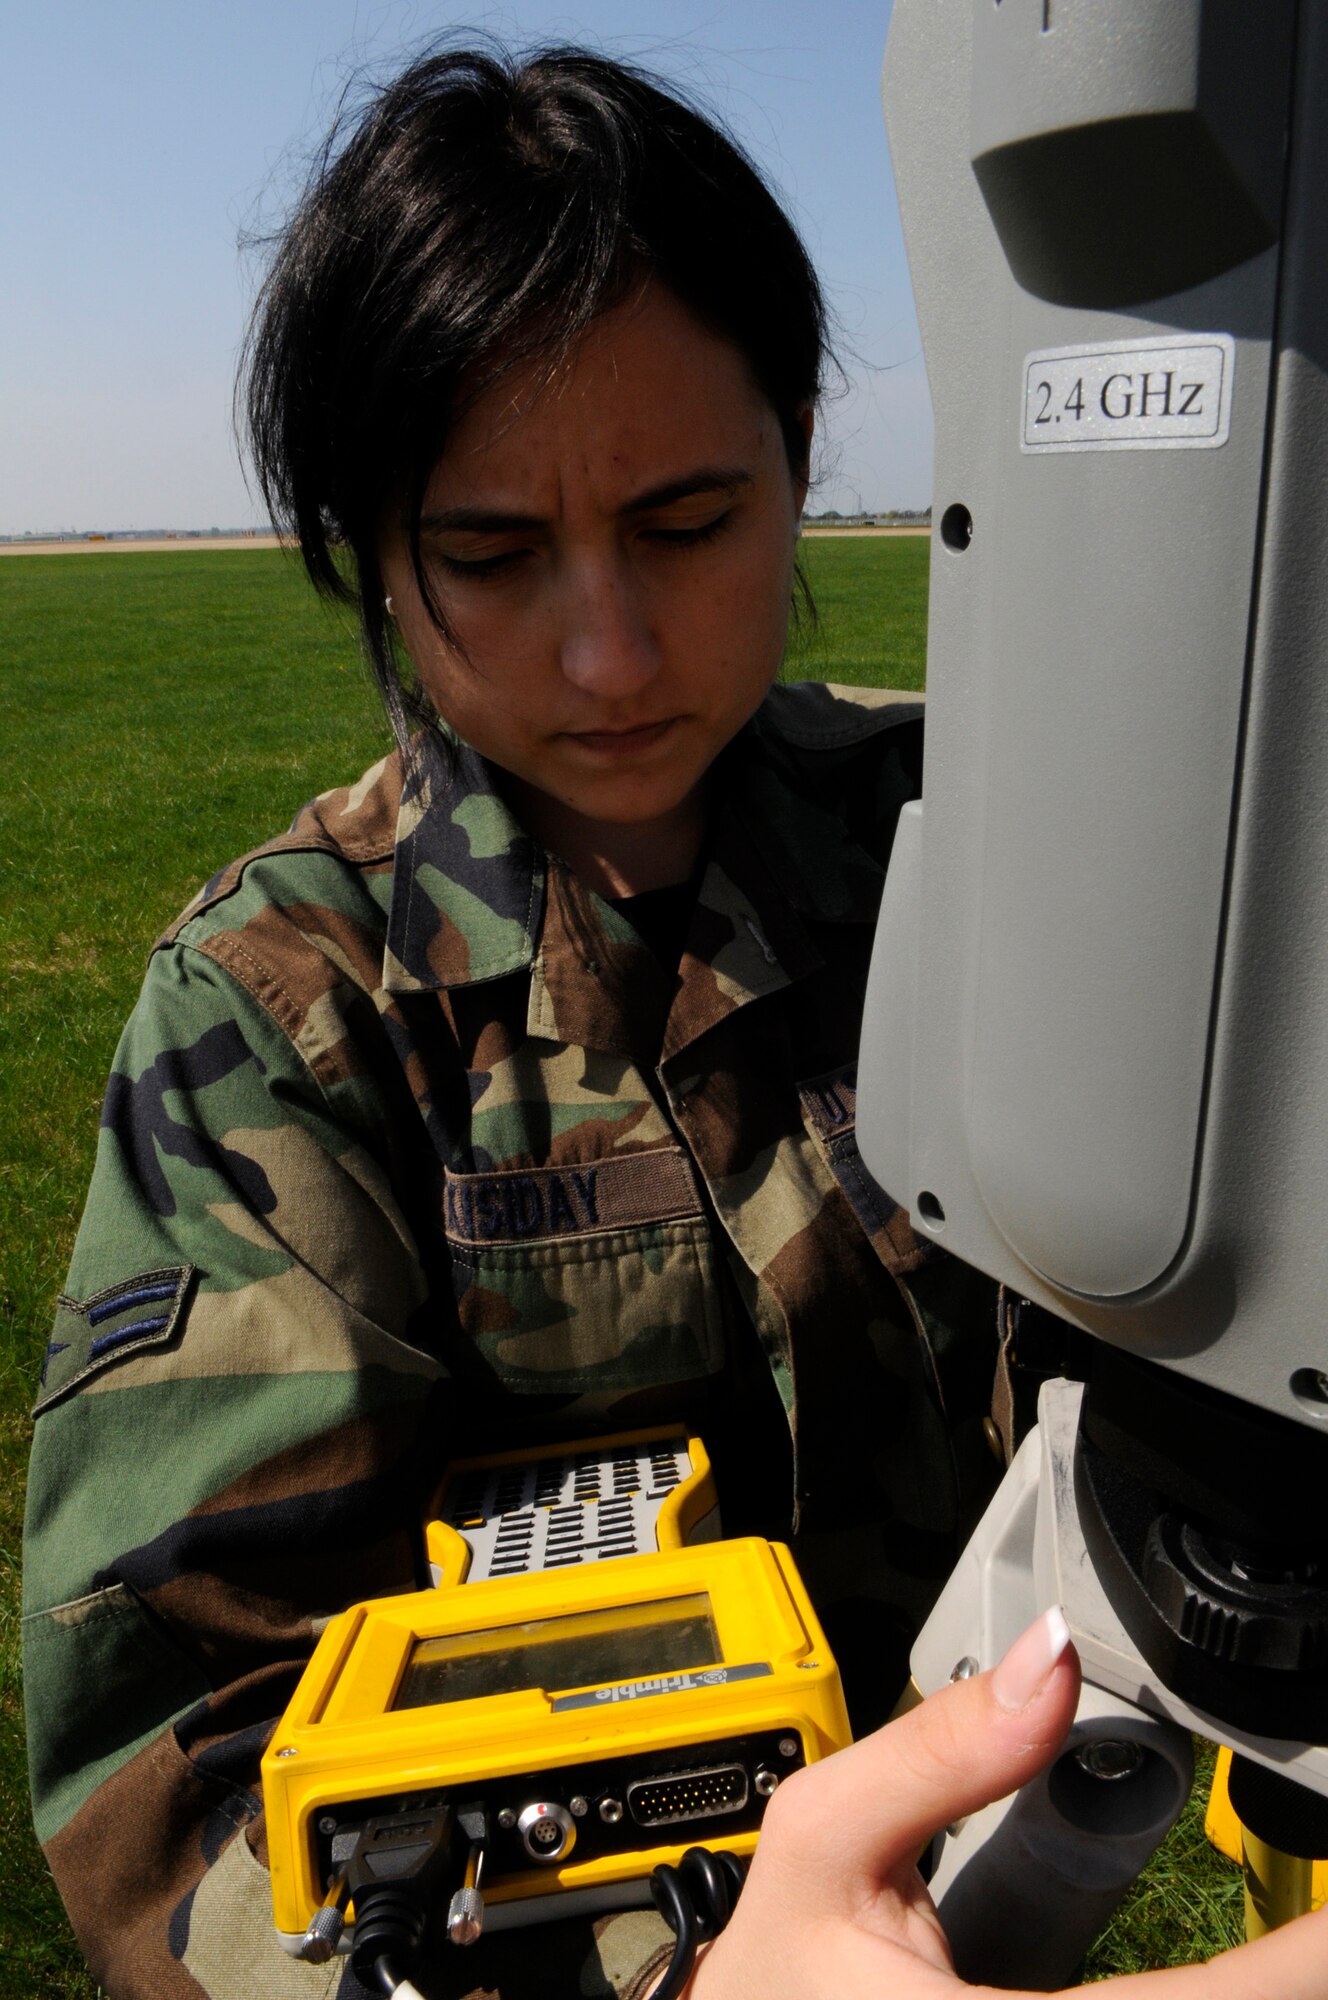 Airman 1st Class Angela Kisiday, 100th Civil Engineer Squadron Geo-Base technician, calibrates her surveying equipment at RAF Mildenhall, April 21.  Geo-base technicians go through four months of technical training as well as on-the-job training in order to provide first-rate surveying to Air Force bases worldwide.  (U.S. Air Force photo by Senior Airman Christopher L. Ingersoll)